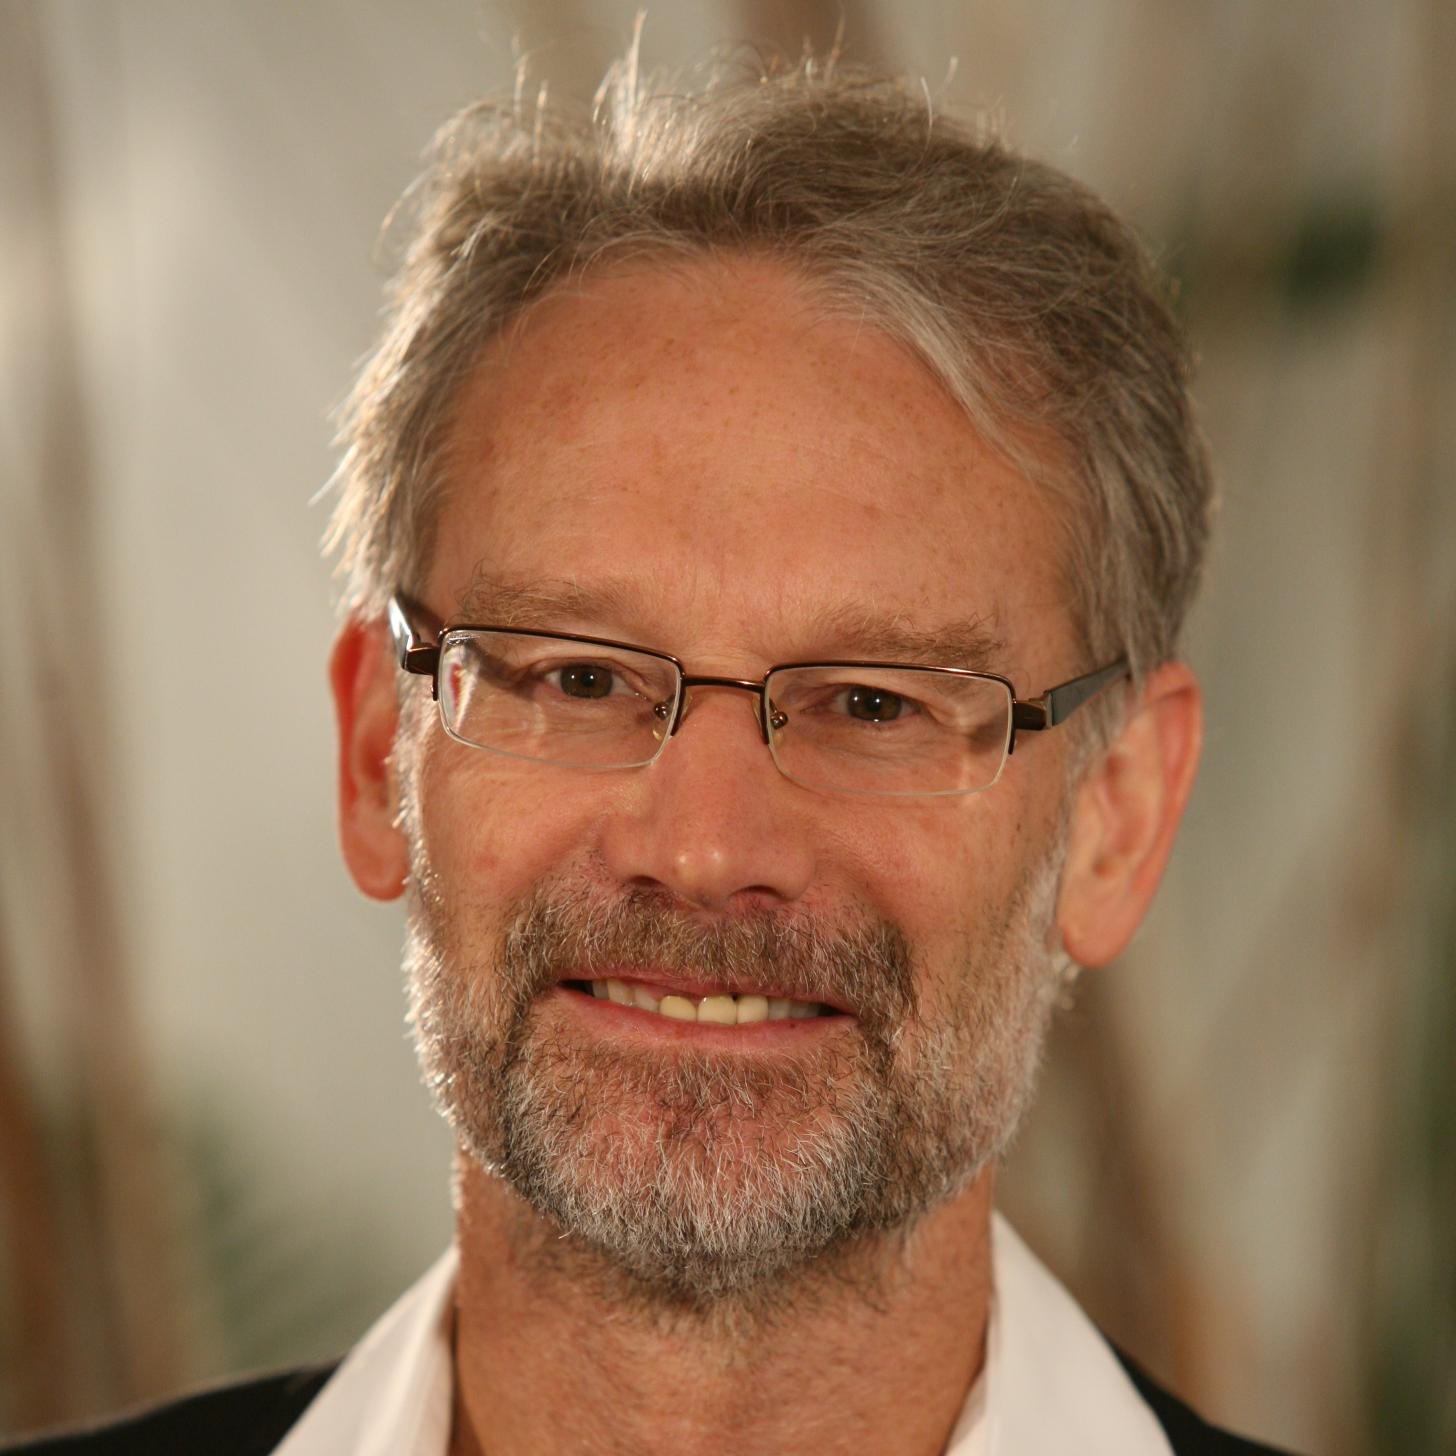 Murray Leibbrandt is the SARChI Chair in Poverty and Inequality Research, the Director of SALDRU and the African Centre of Excellence for Inequality Research.